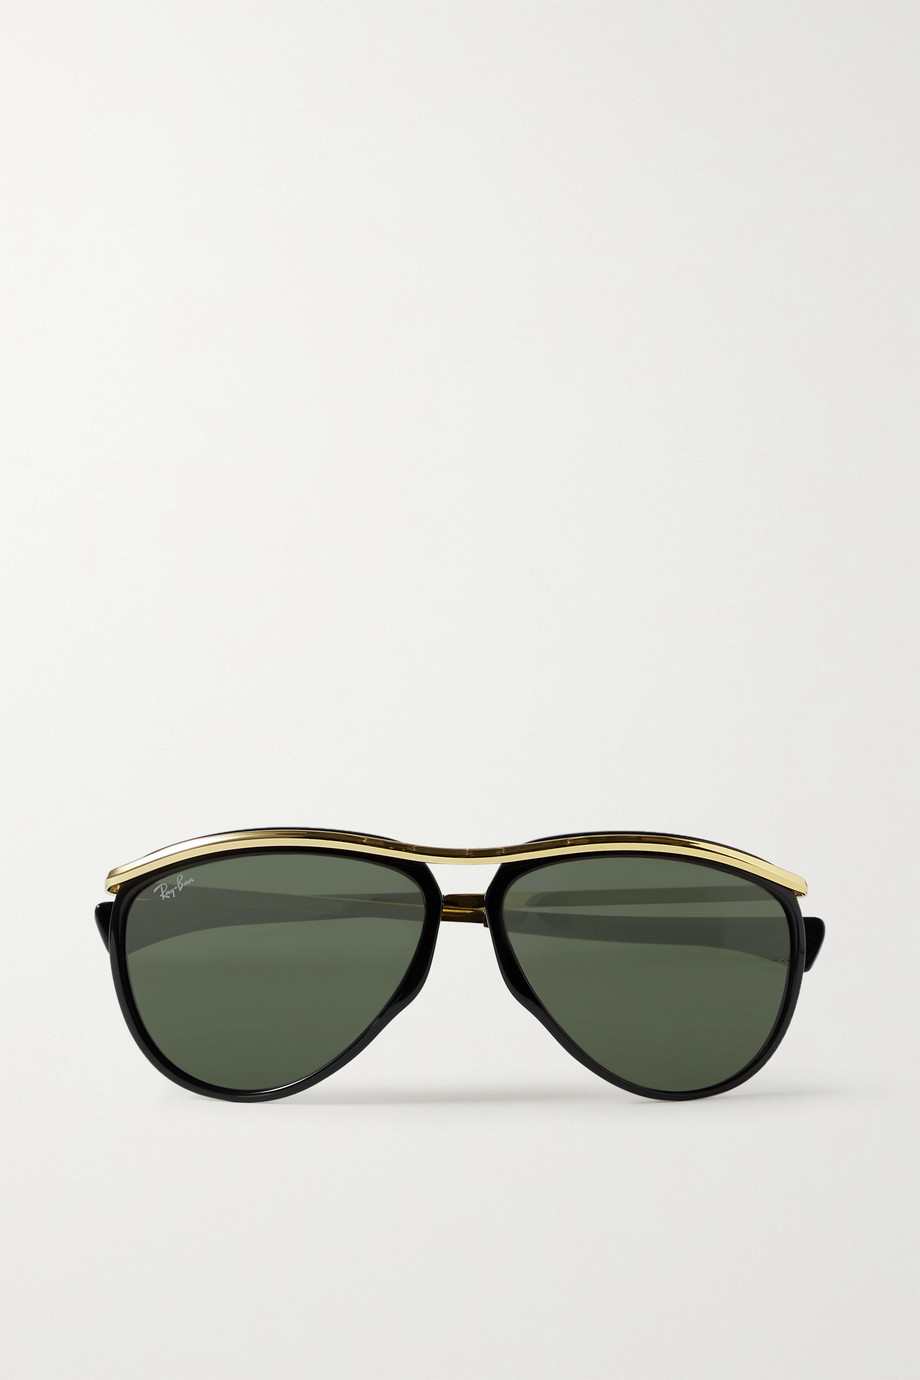 ray ban serial number